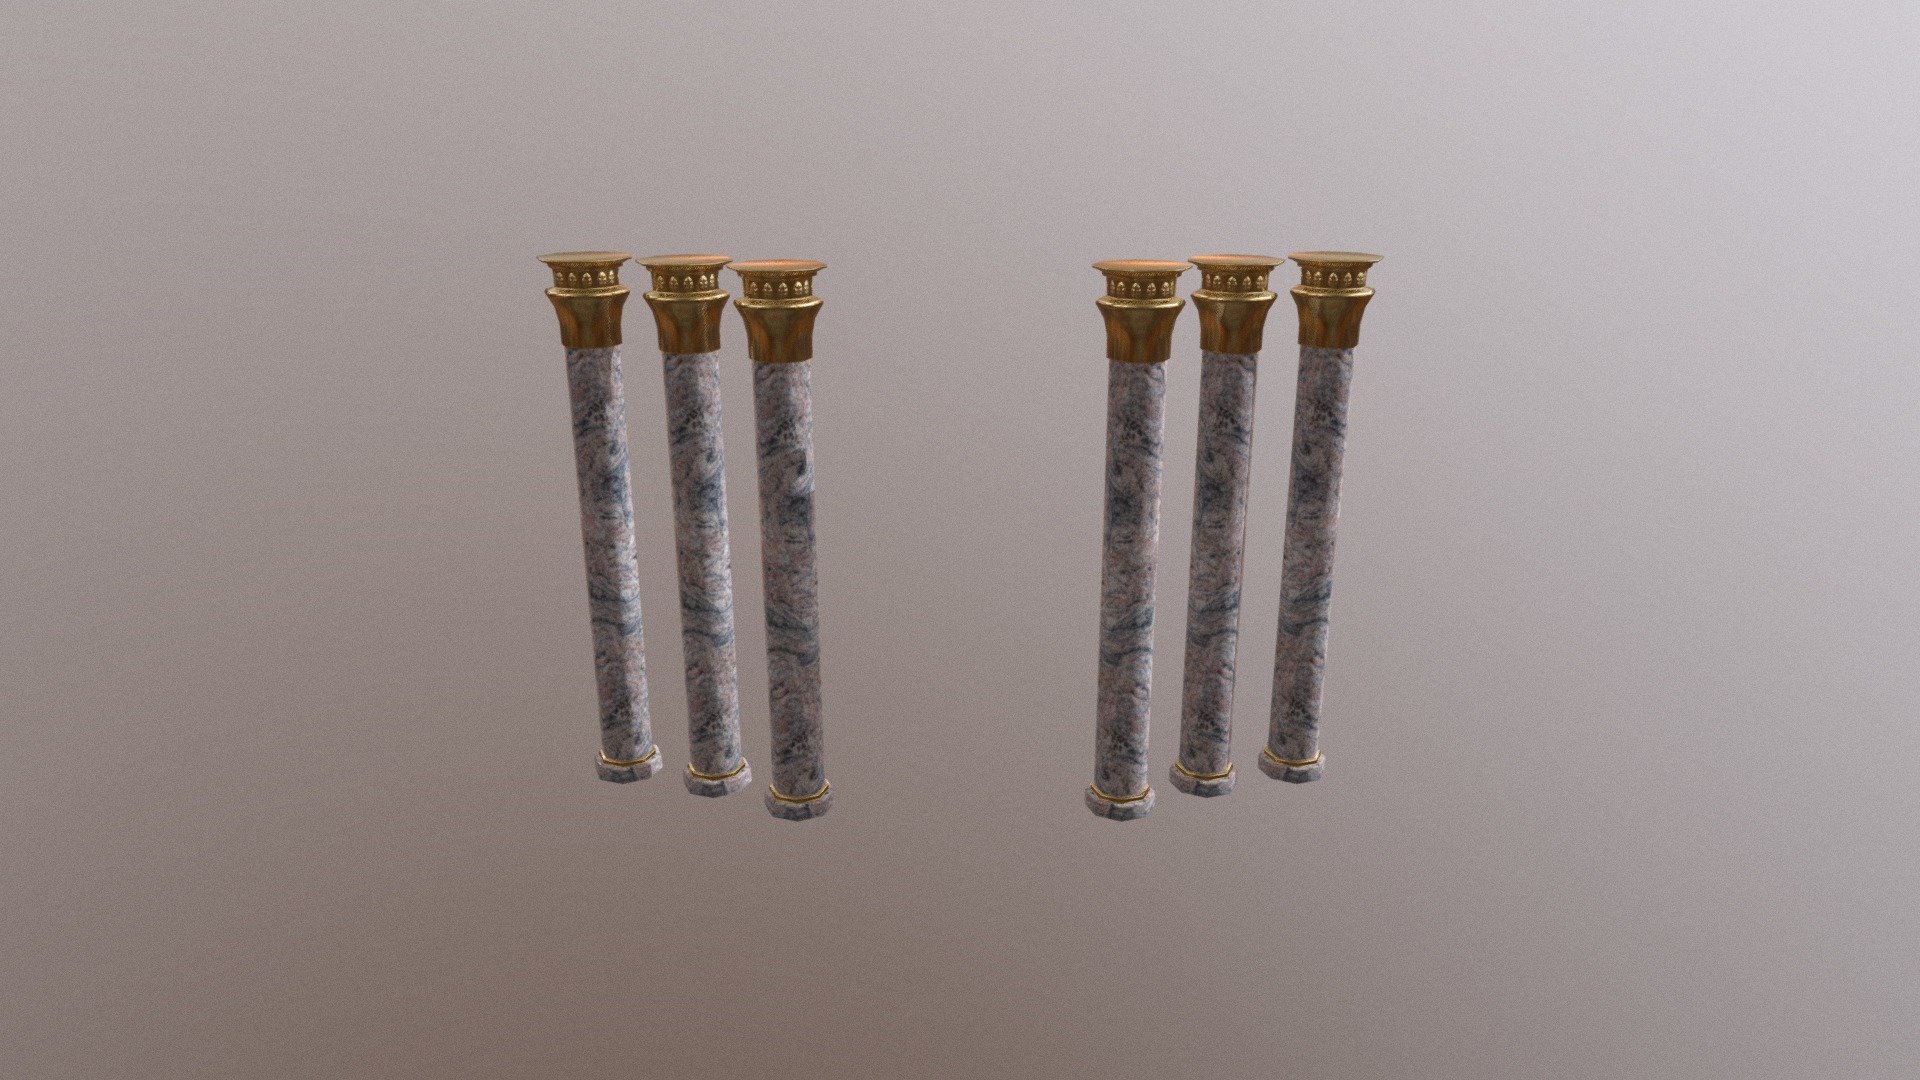 Another asset of my church project - Pillar - 3D model by Carly.Simmons 3d model